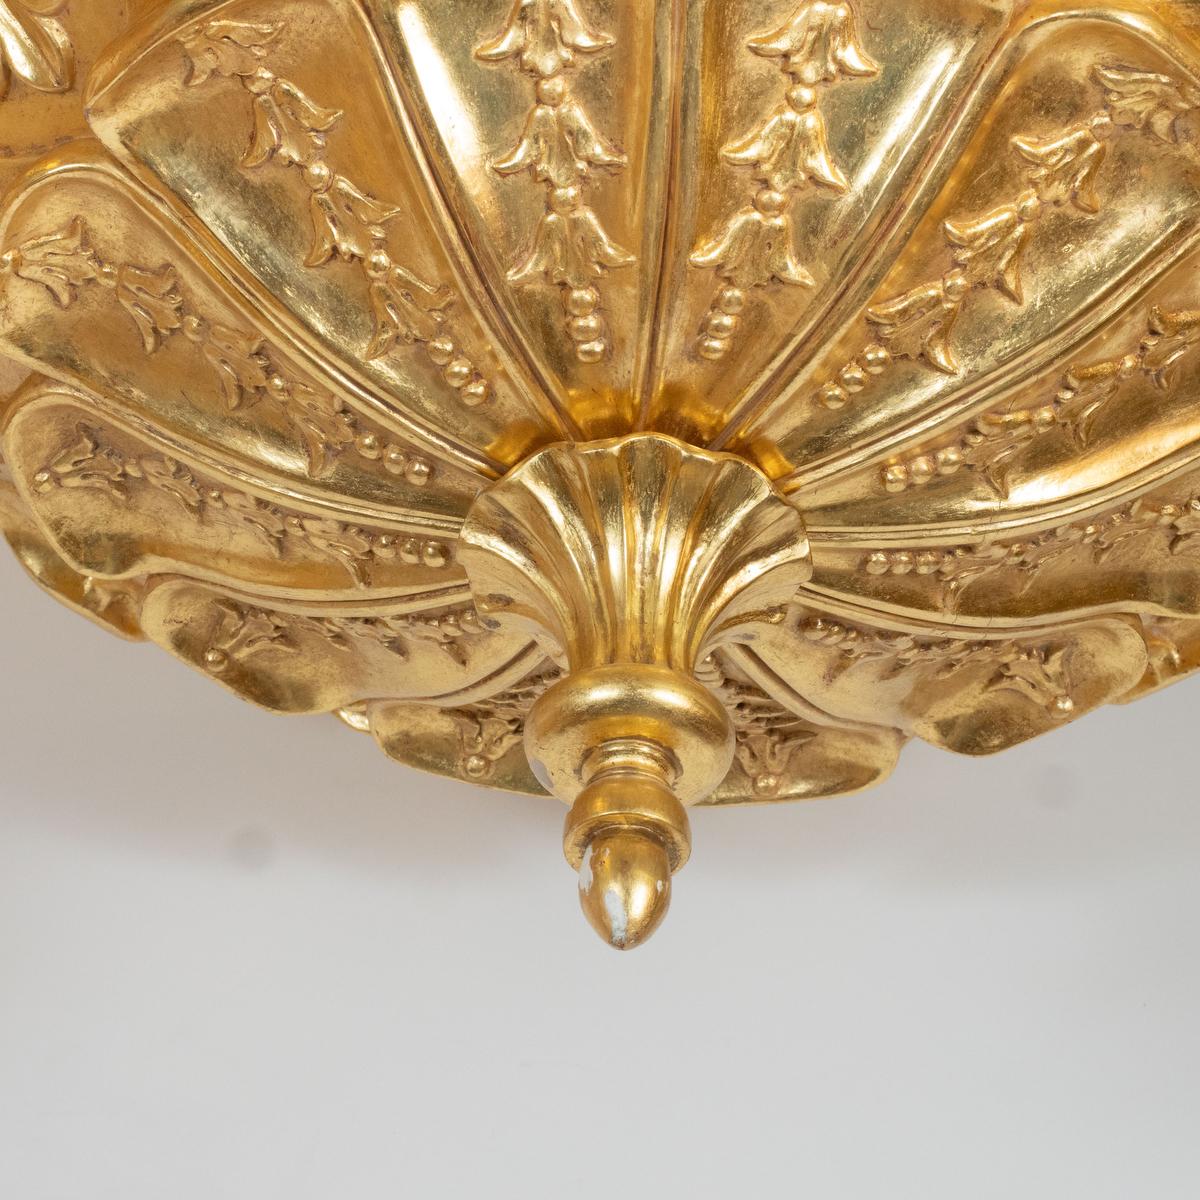 Giltwood Foliate Motif Bowl Pendant by Carlos Villegas In Excellent Condition For Sale In Tarrytown, NY